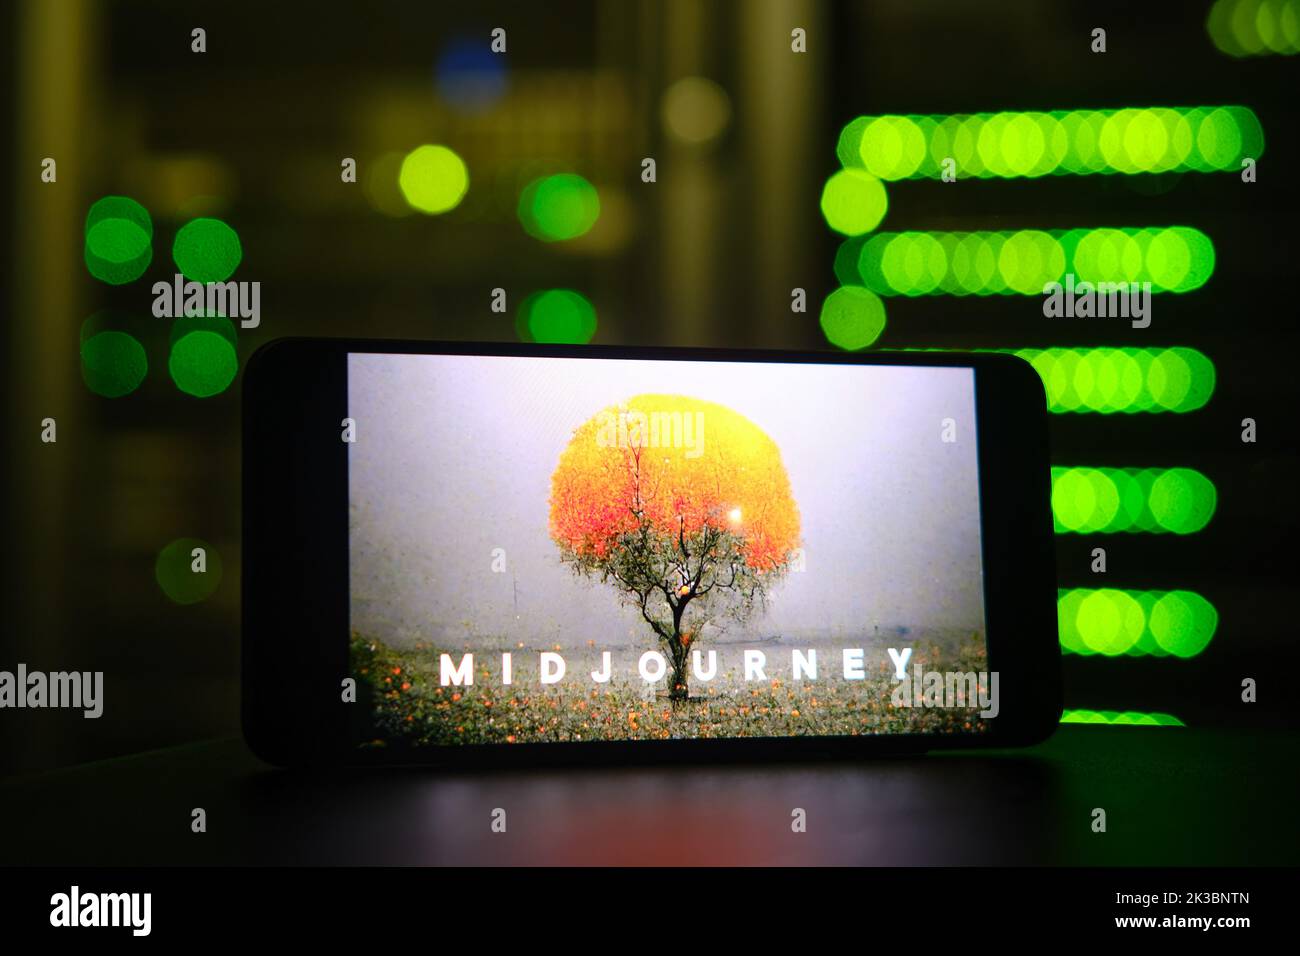 AI Midjourney logo on the phone screen on the background of the server room. Smartphone with artificial intelligence neural network logo - Moscow, Rus Stock Photo